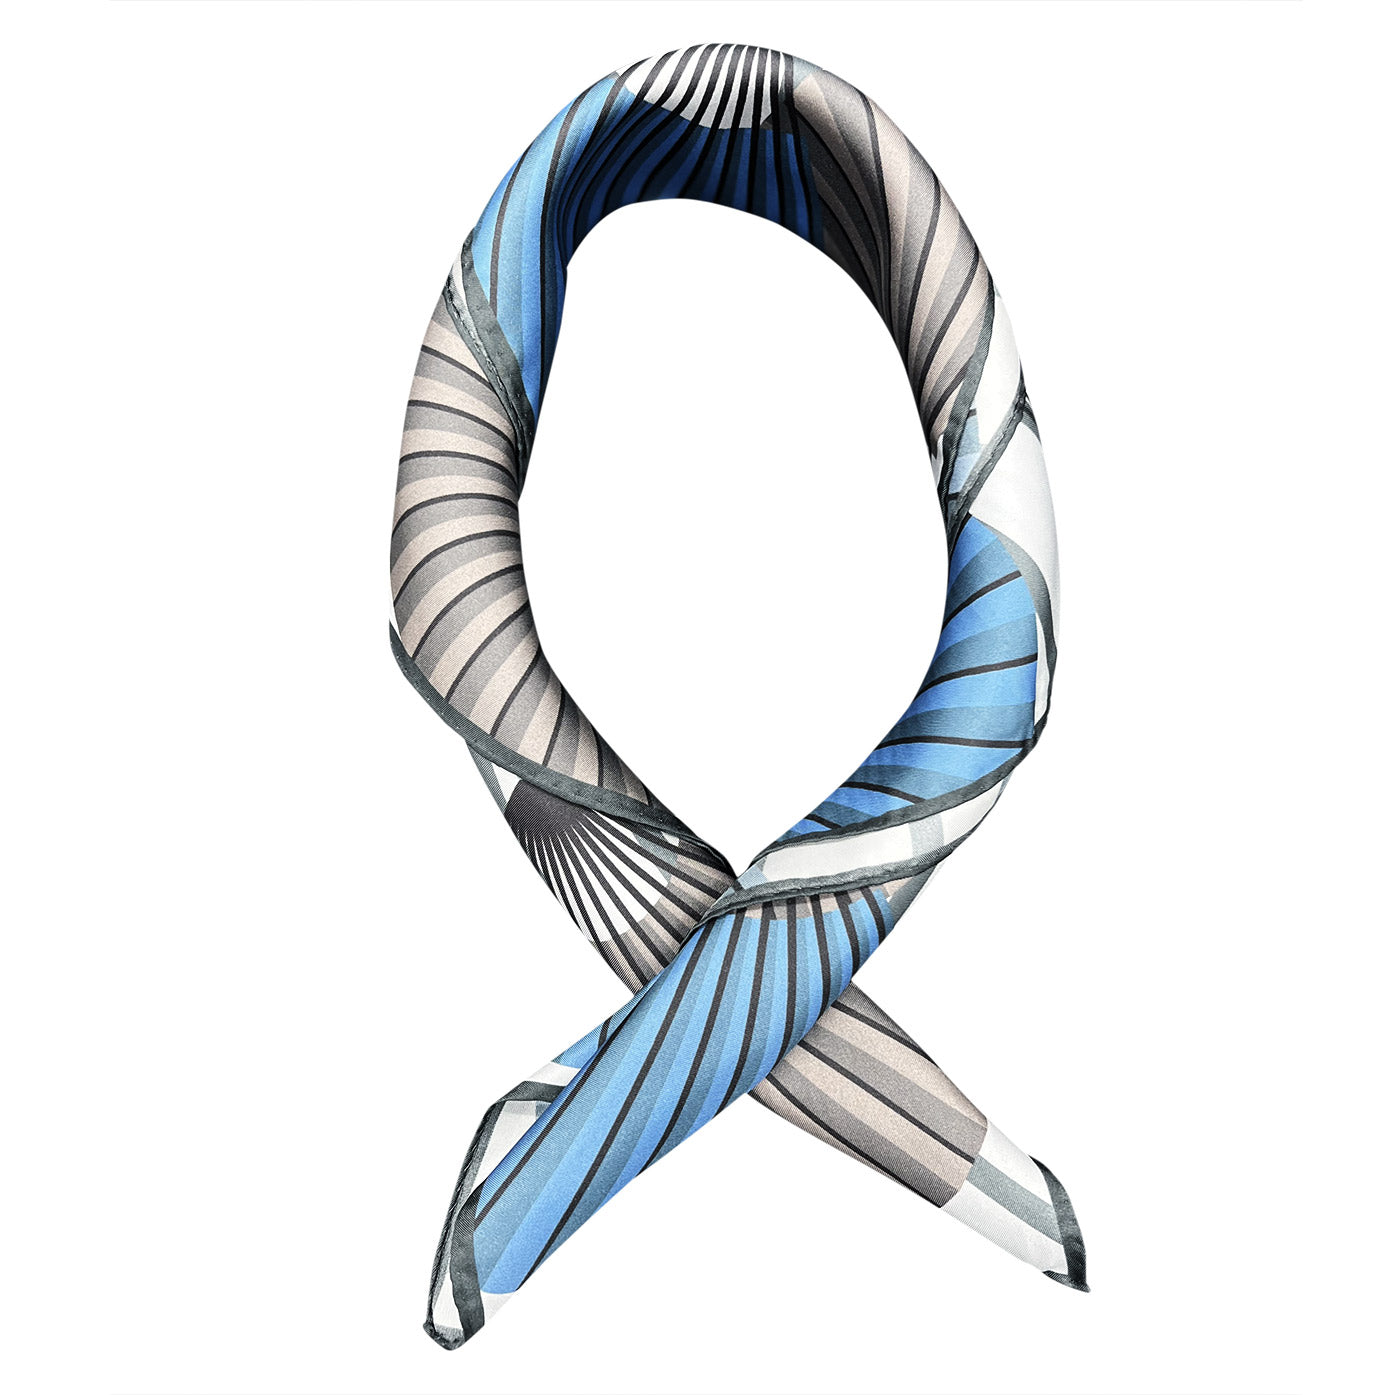 'The Fan'  neckerchief twisted and curled into a loop on a white background.